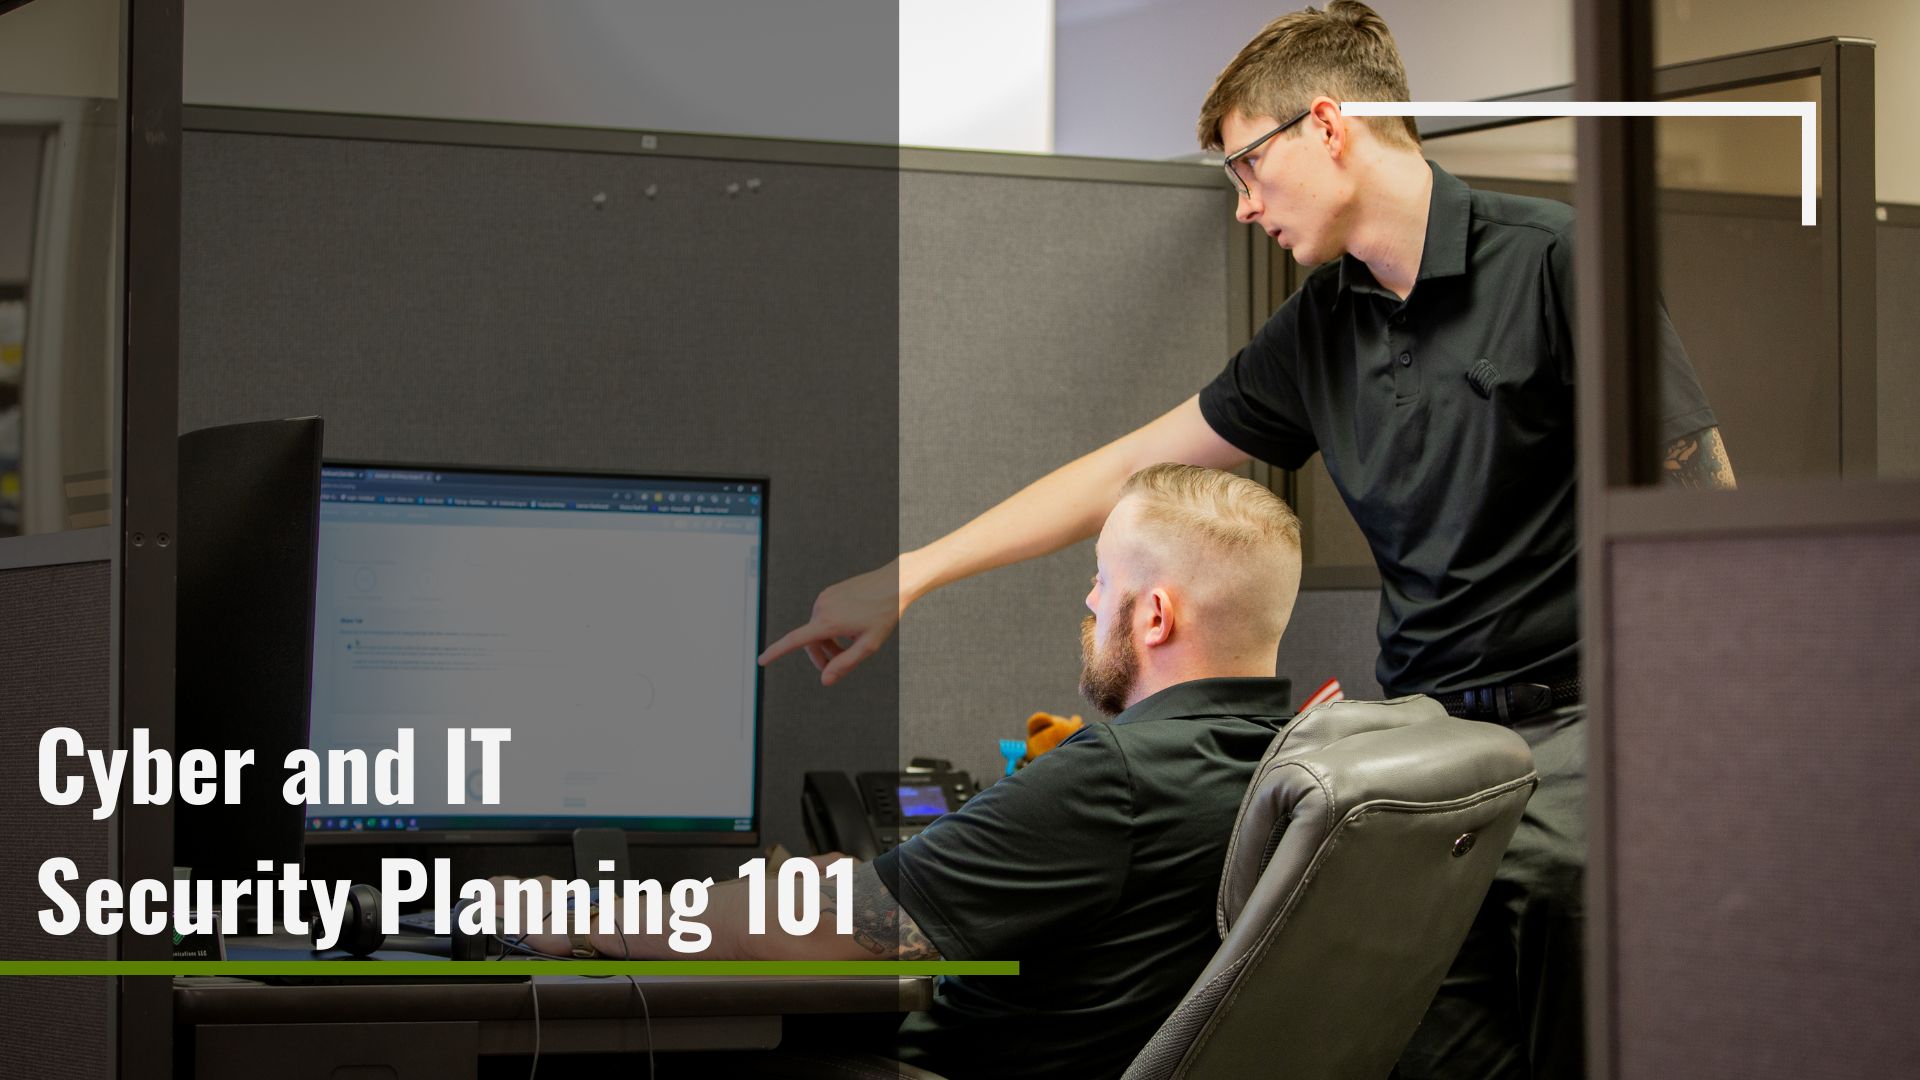 Cyber and IT Security Planning 101